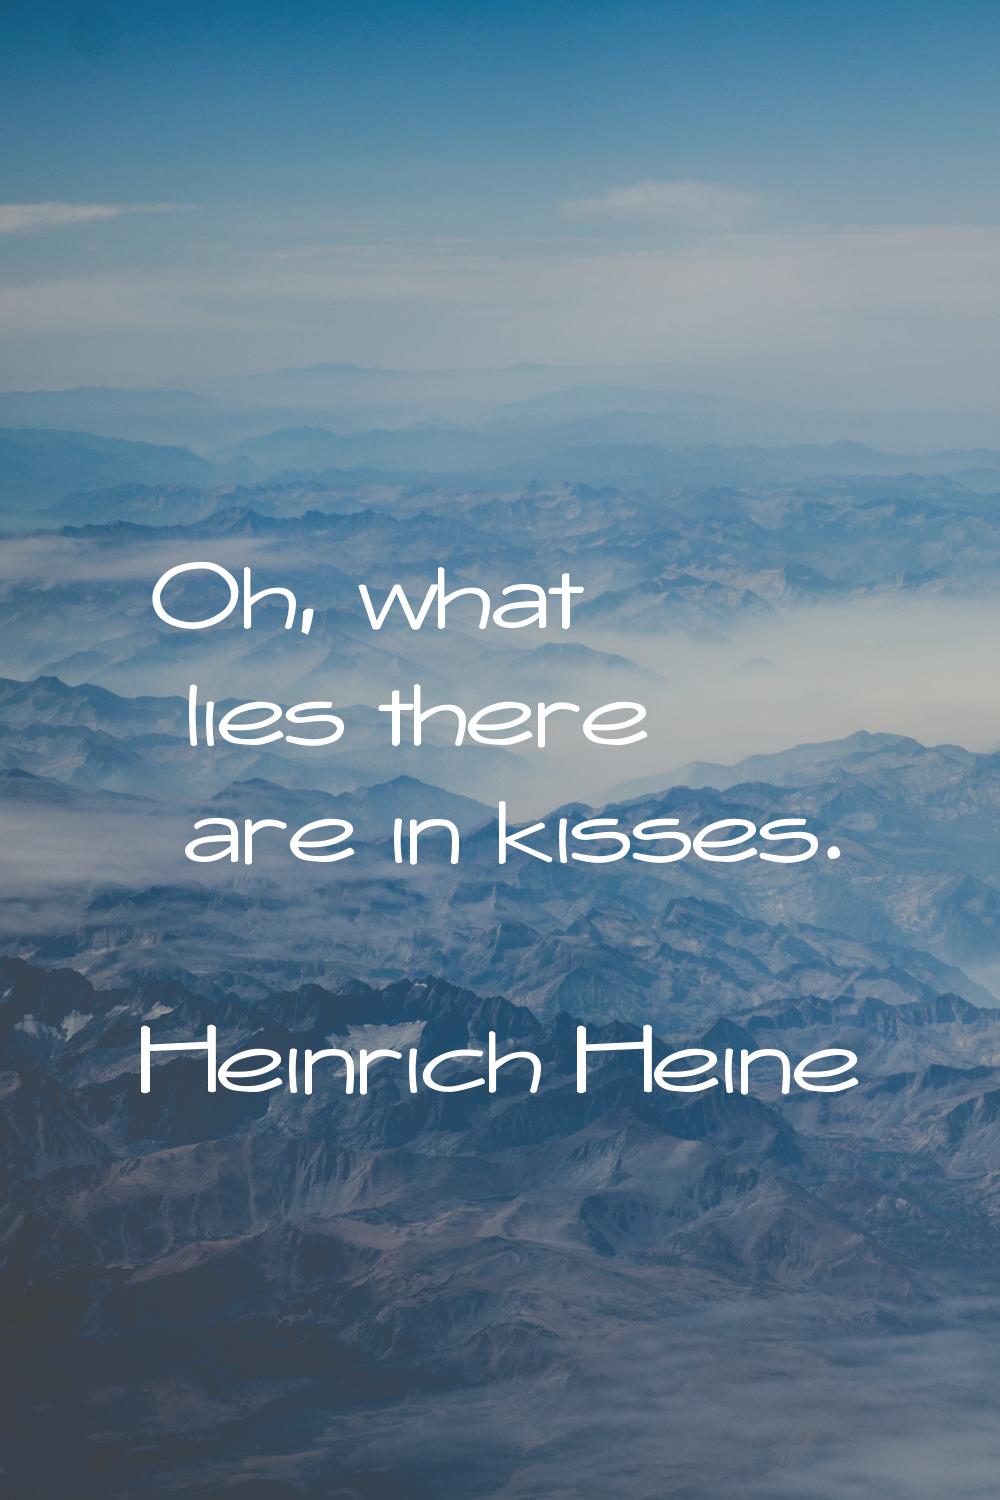 Oh, what lies there are in kisses.